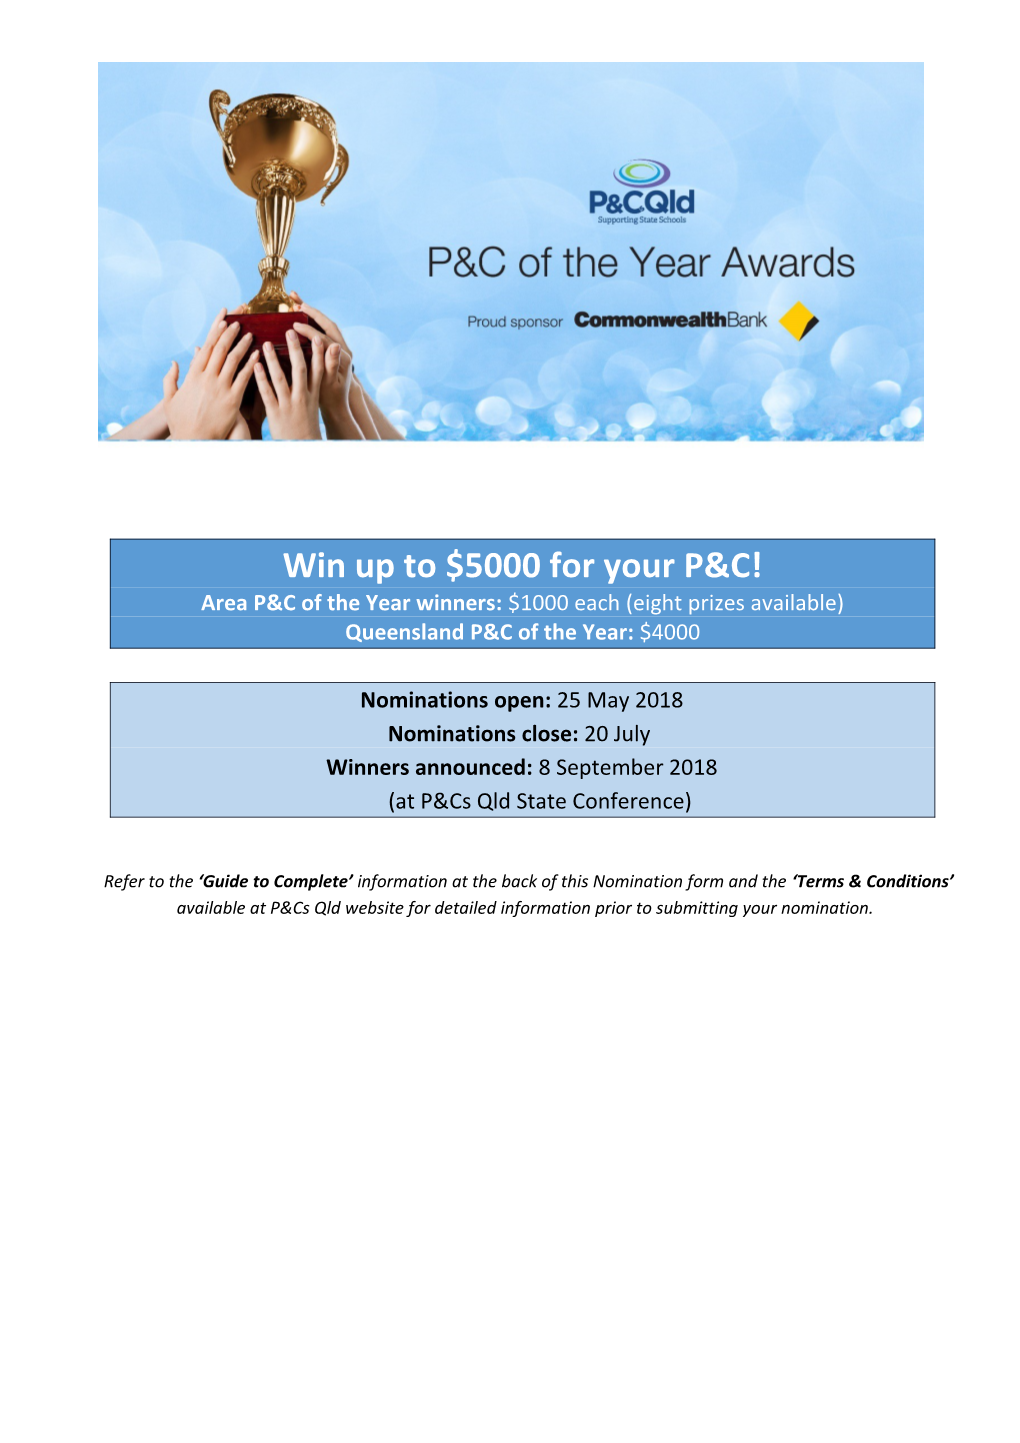 Win up to $5000 for Your P&C!